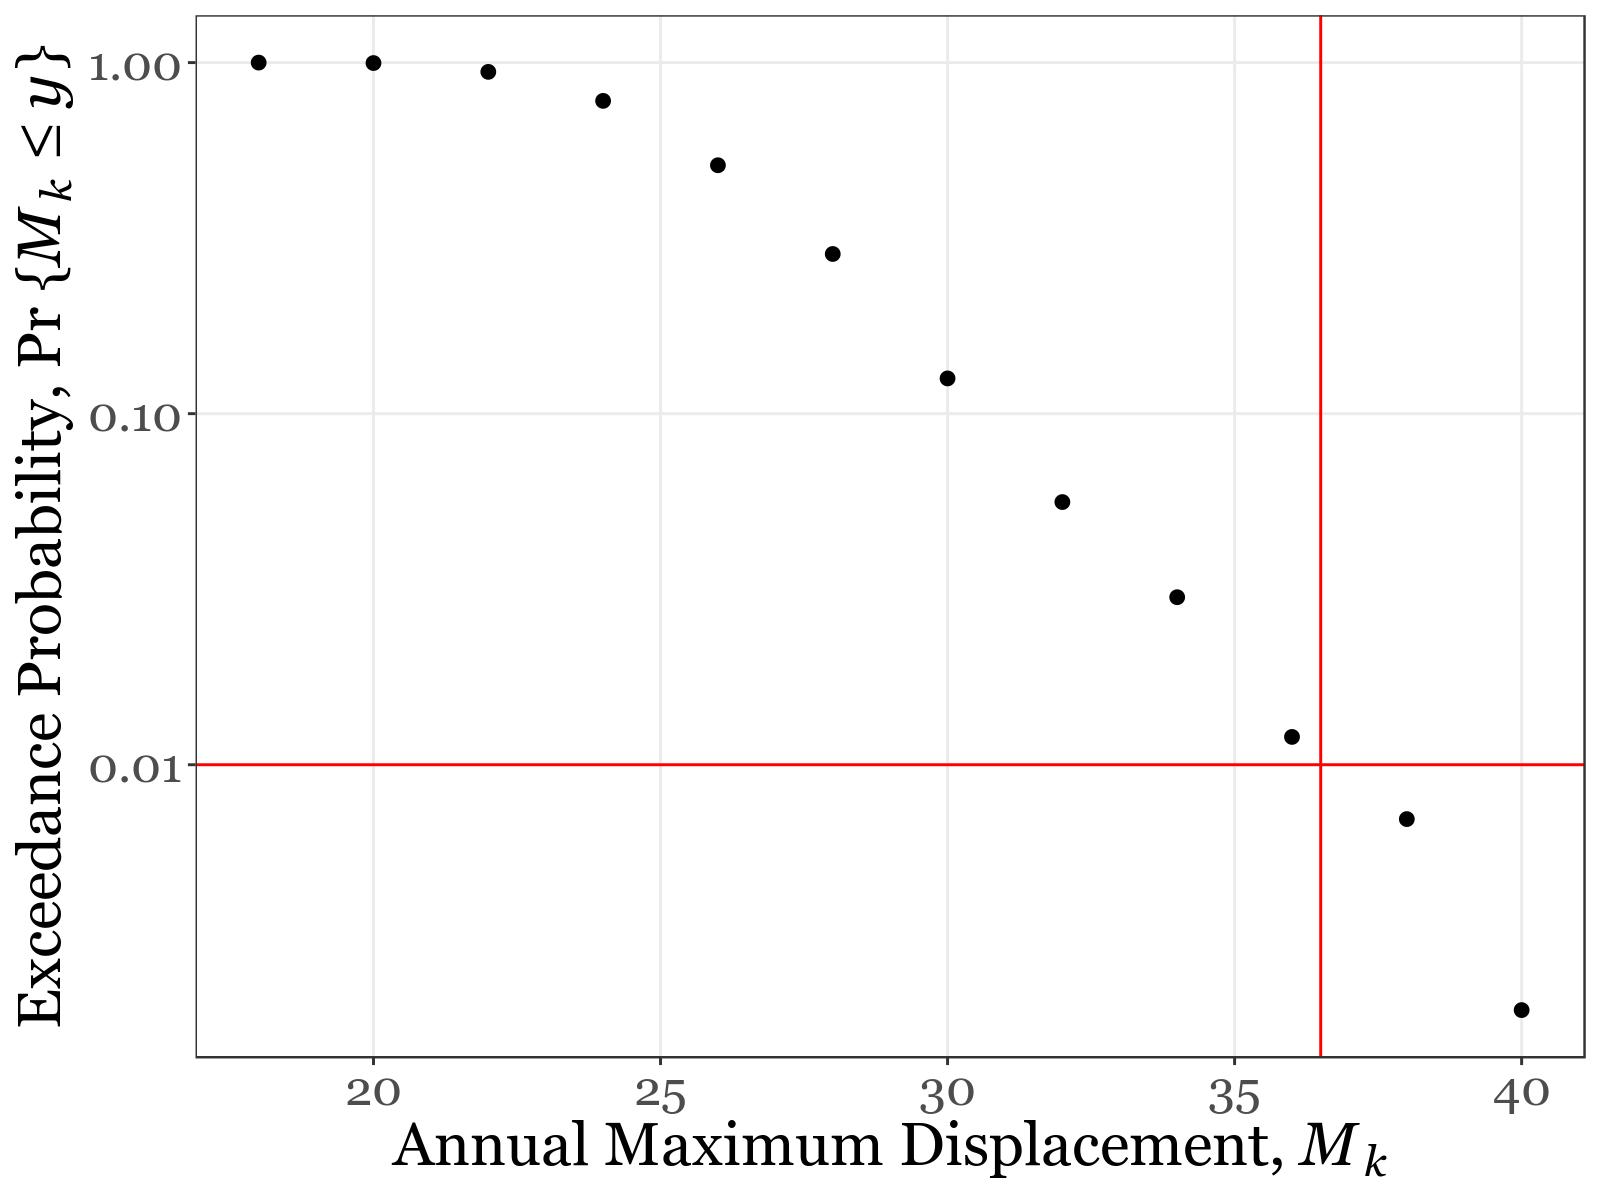 Exceedance Probability of Annual Maximum Displacement over 1,000 years